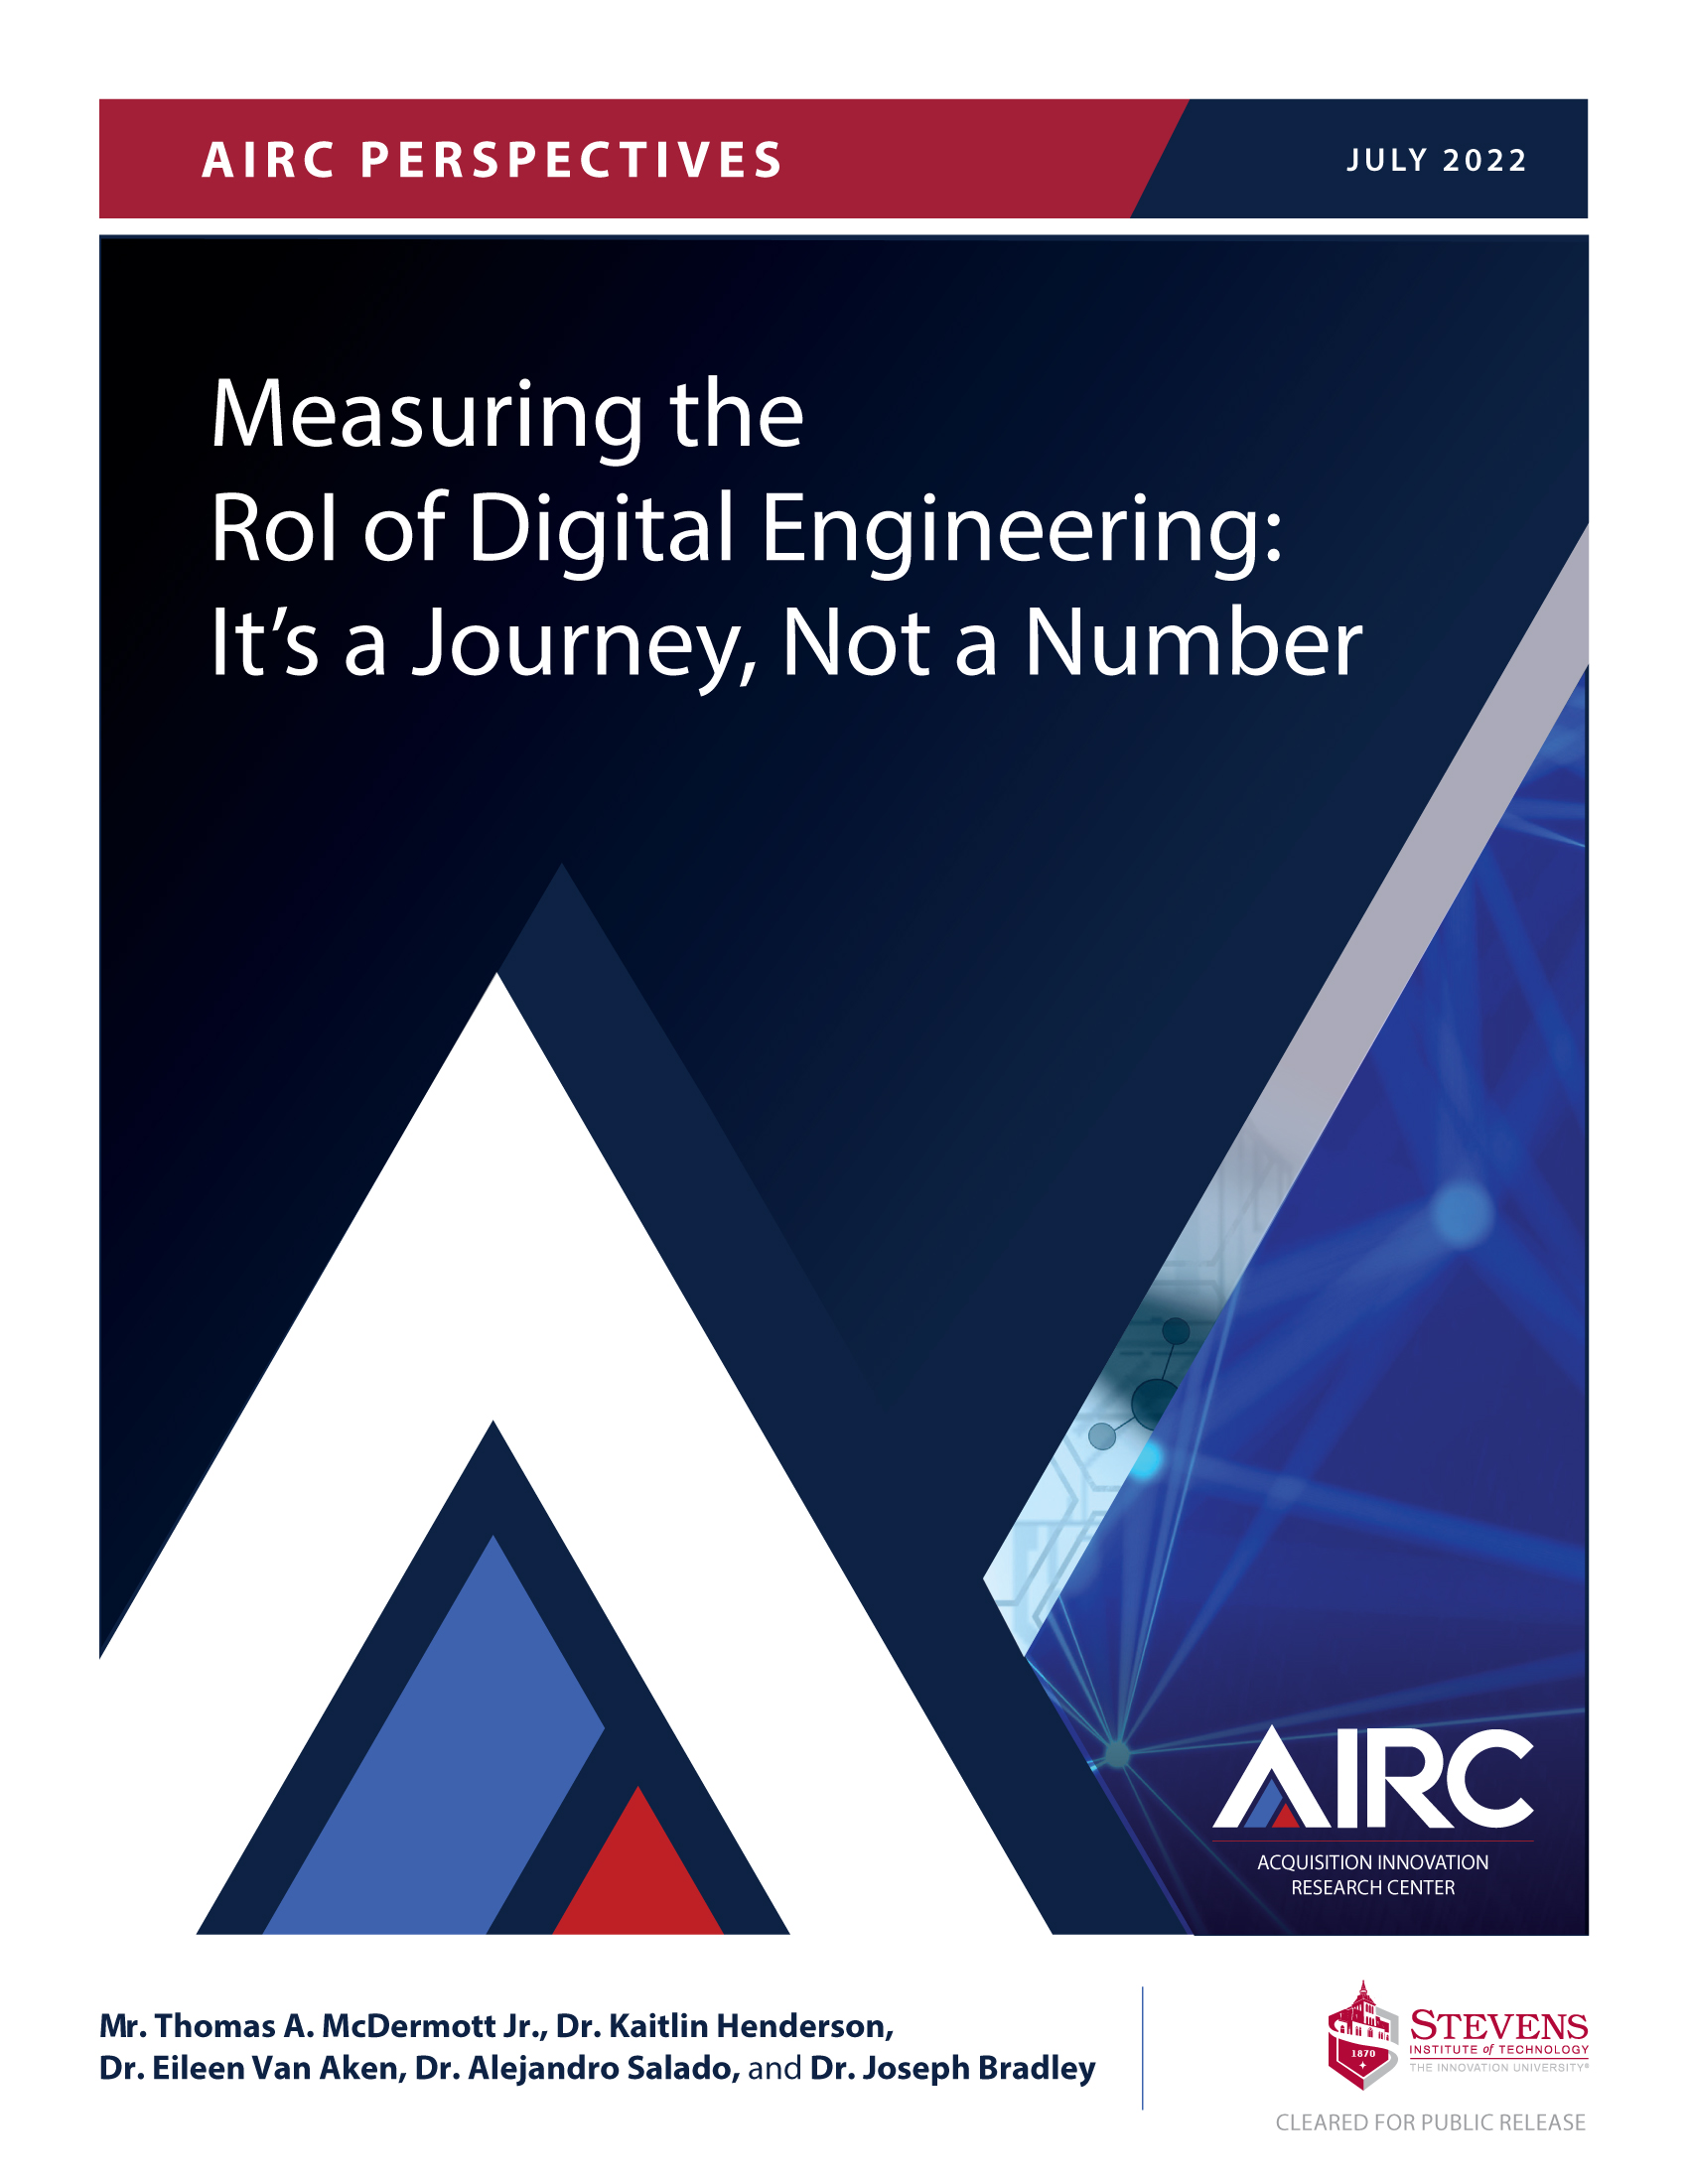 Measuring the RoI of Digital Engineering: It's a Journey, Not a Number -  The Acquisition Innovation Research Center